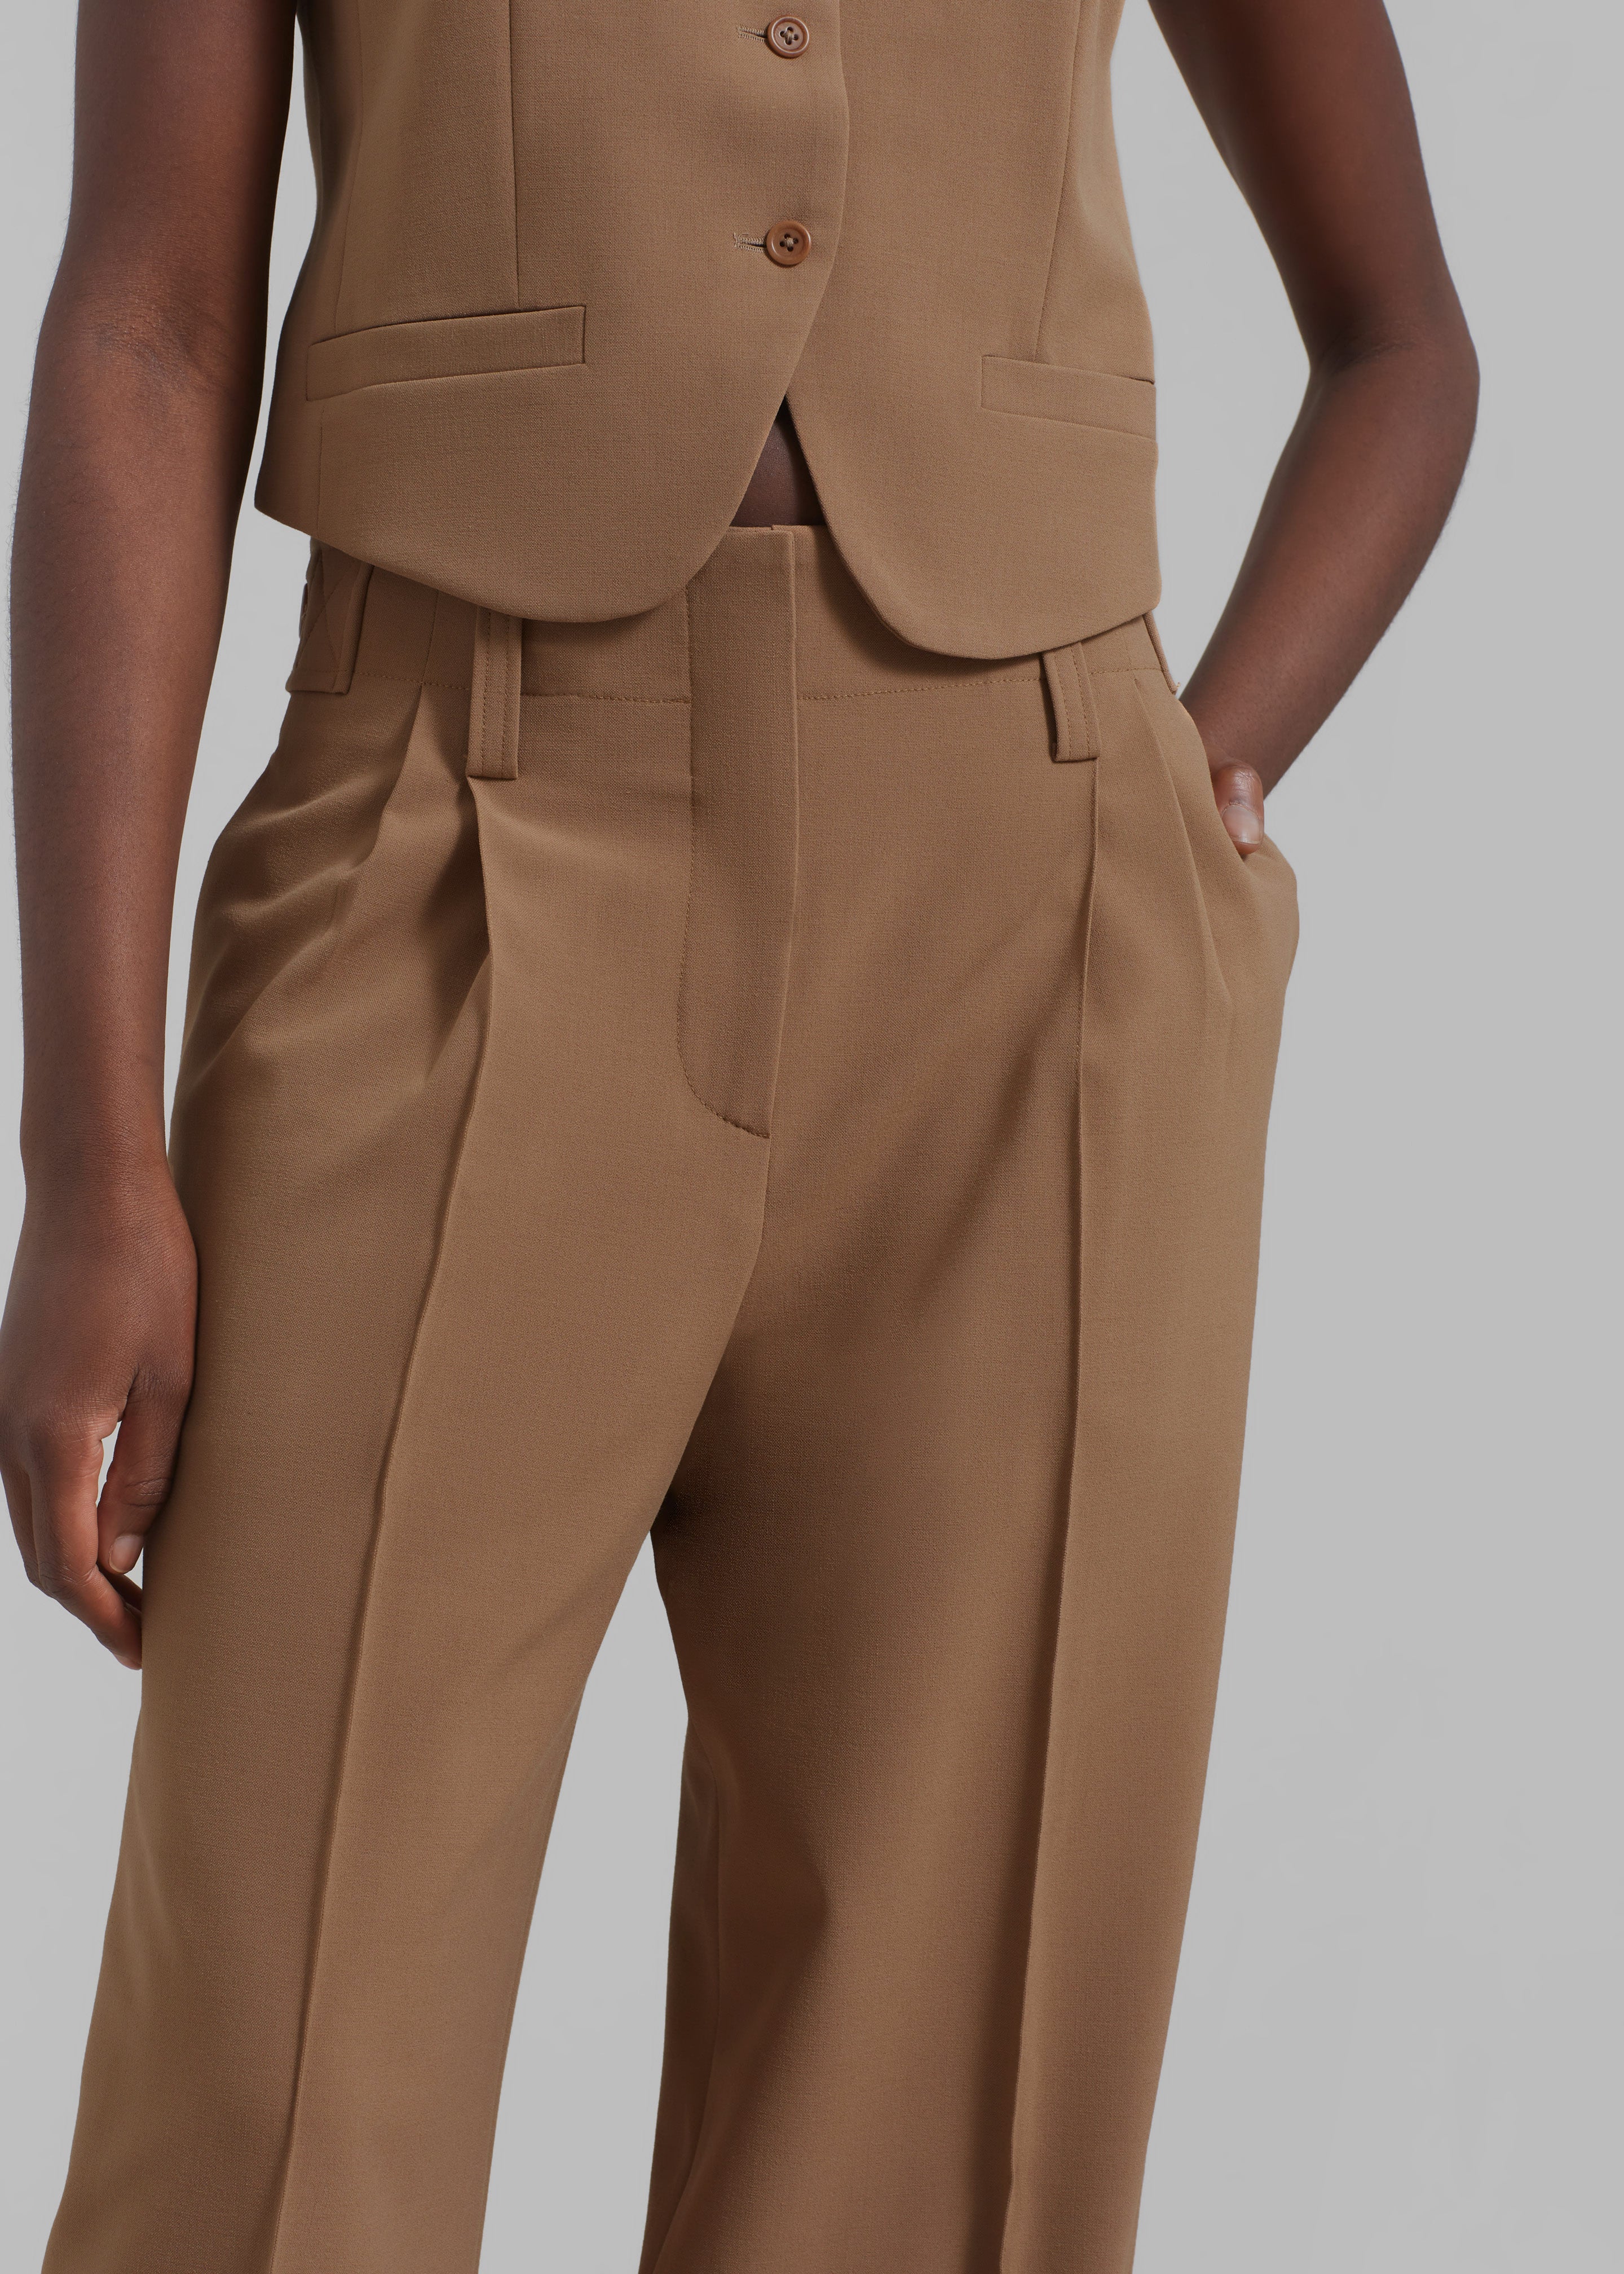 Beaufille Ulla Trousers - Camel - 4